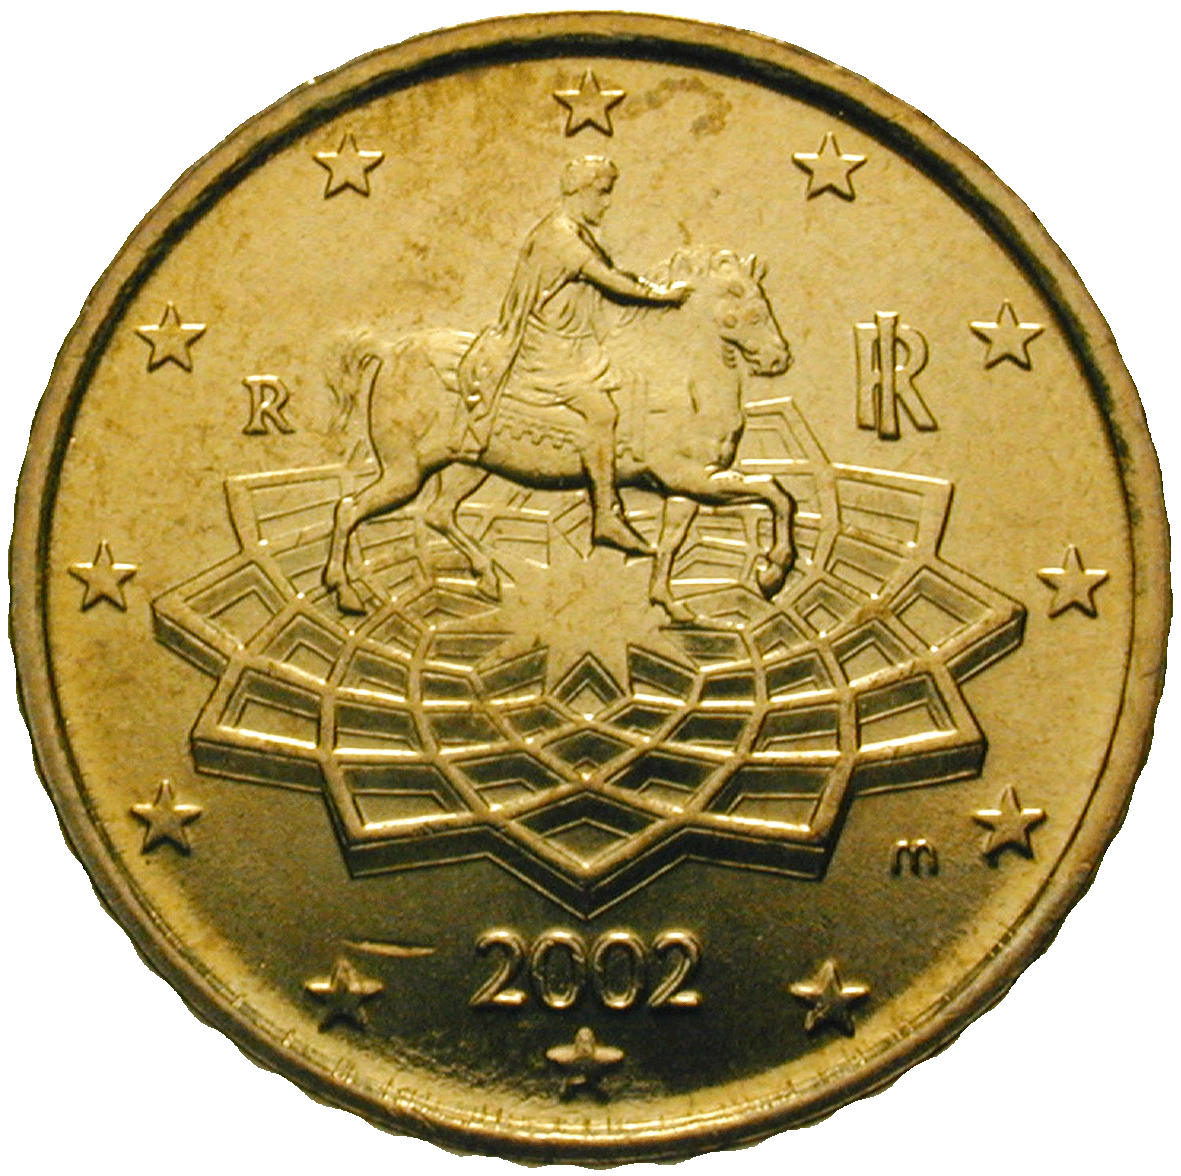 Republic of Italy, 50 Euro Cent 2002 (obverse)